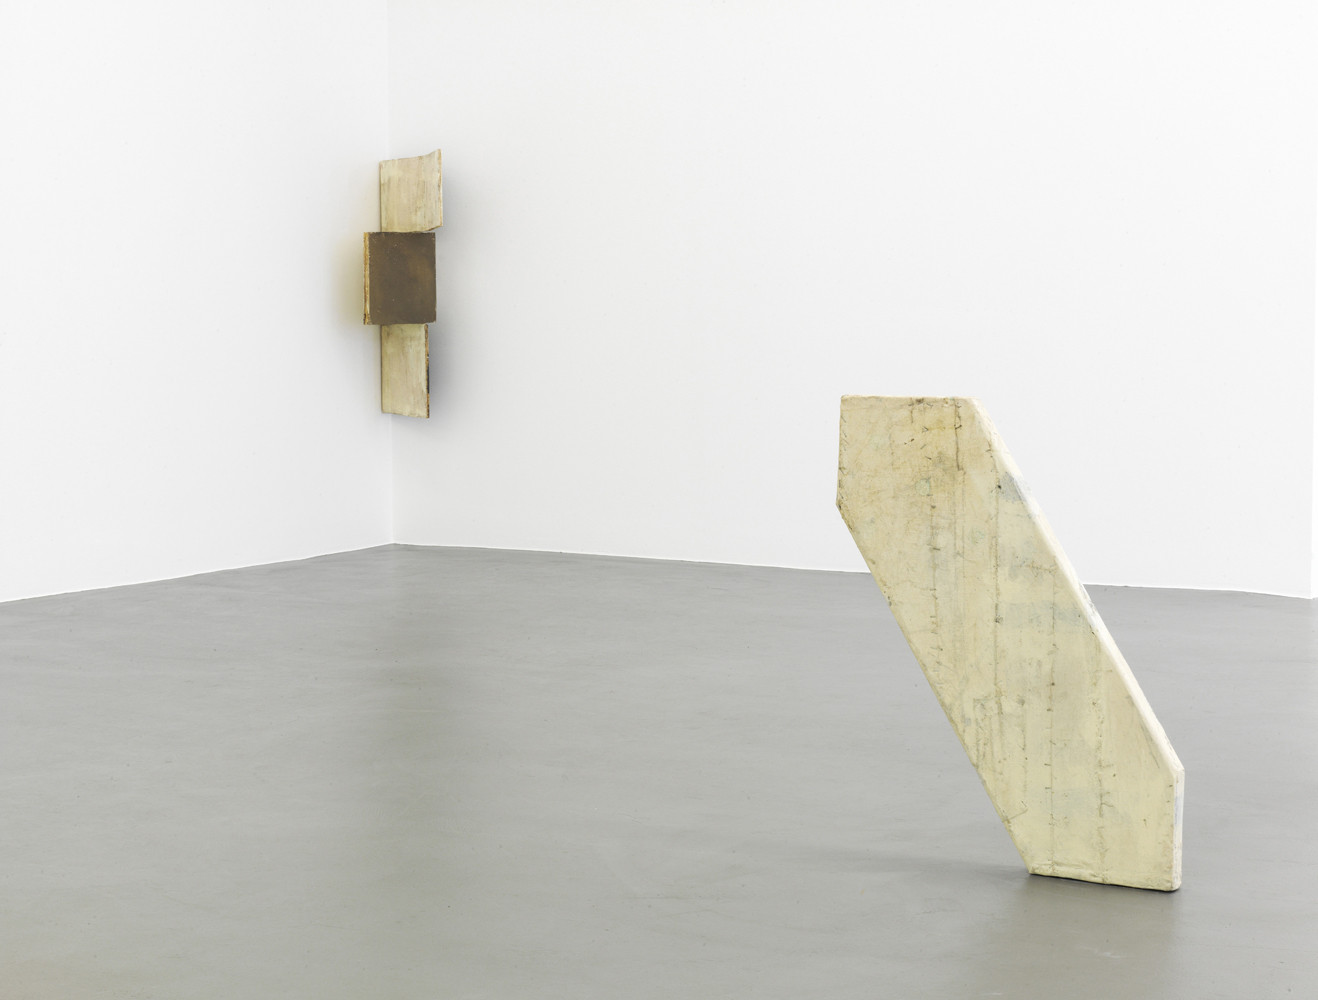 Lawrence Carroll, ‘Back to the Cave’, Installationsansicht, Buchmann Galerie, 2013